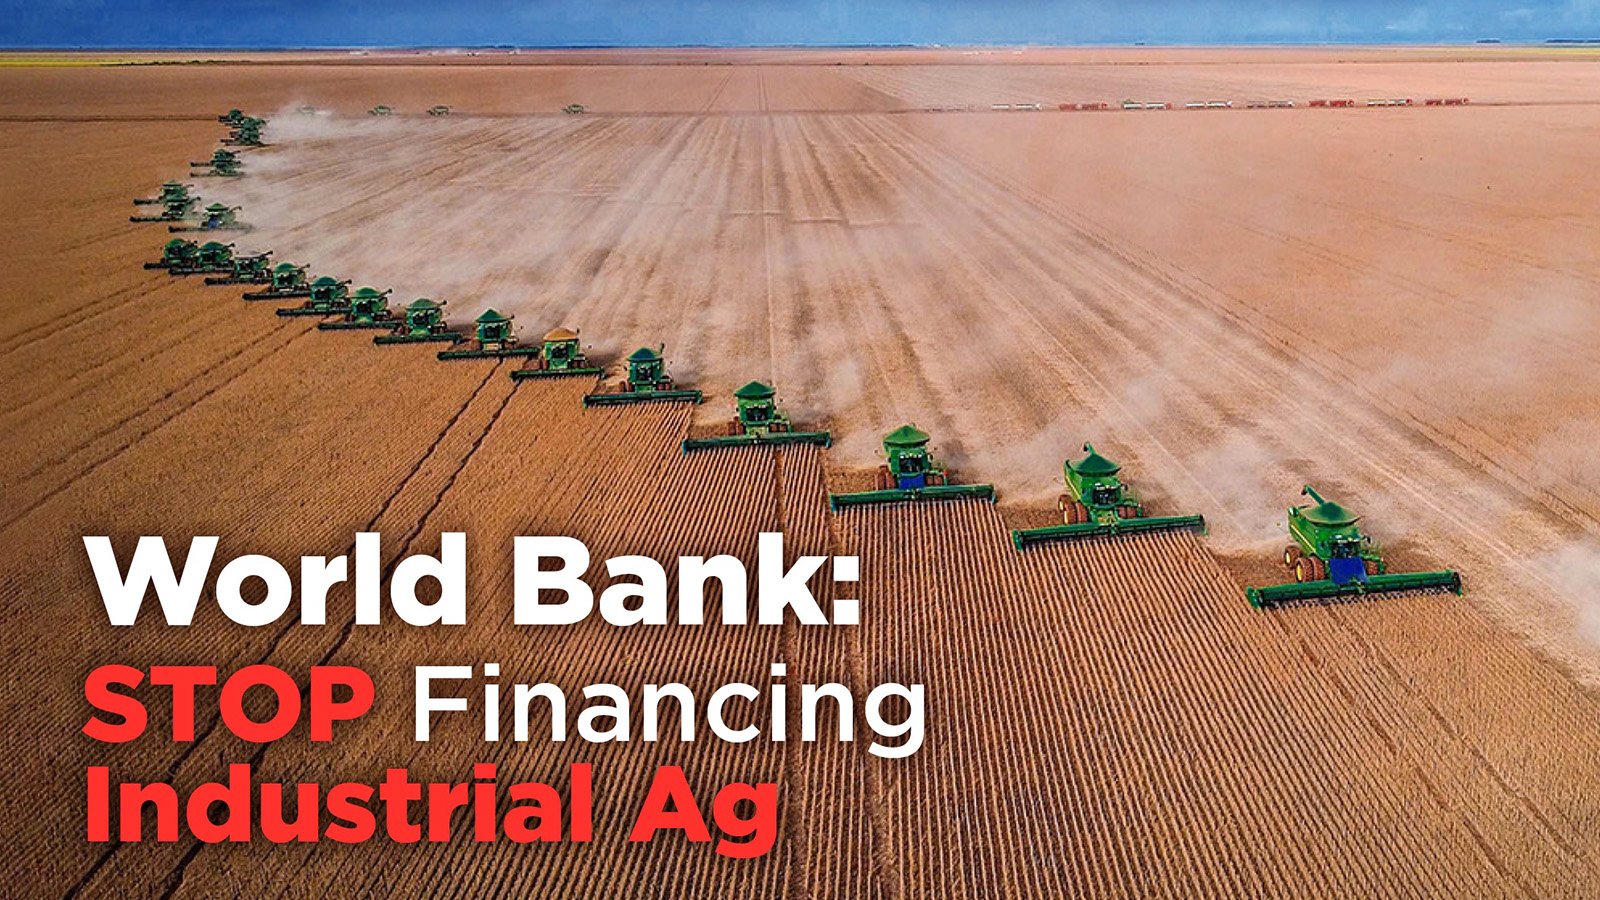 "World Bank: STOP Financing Industrial Ag" graphic 